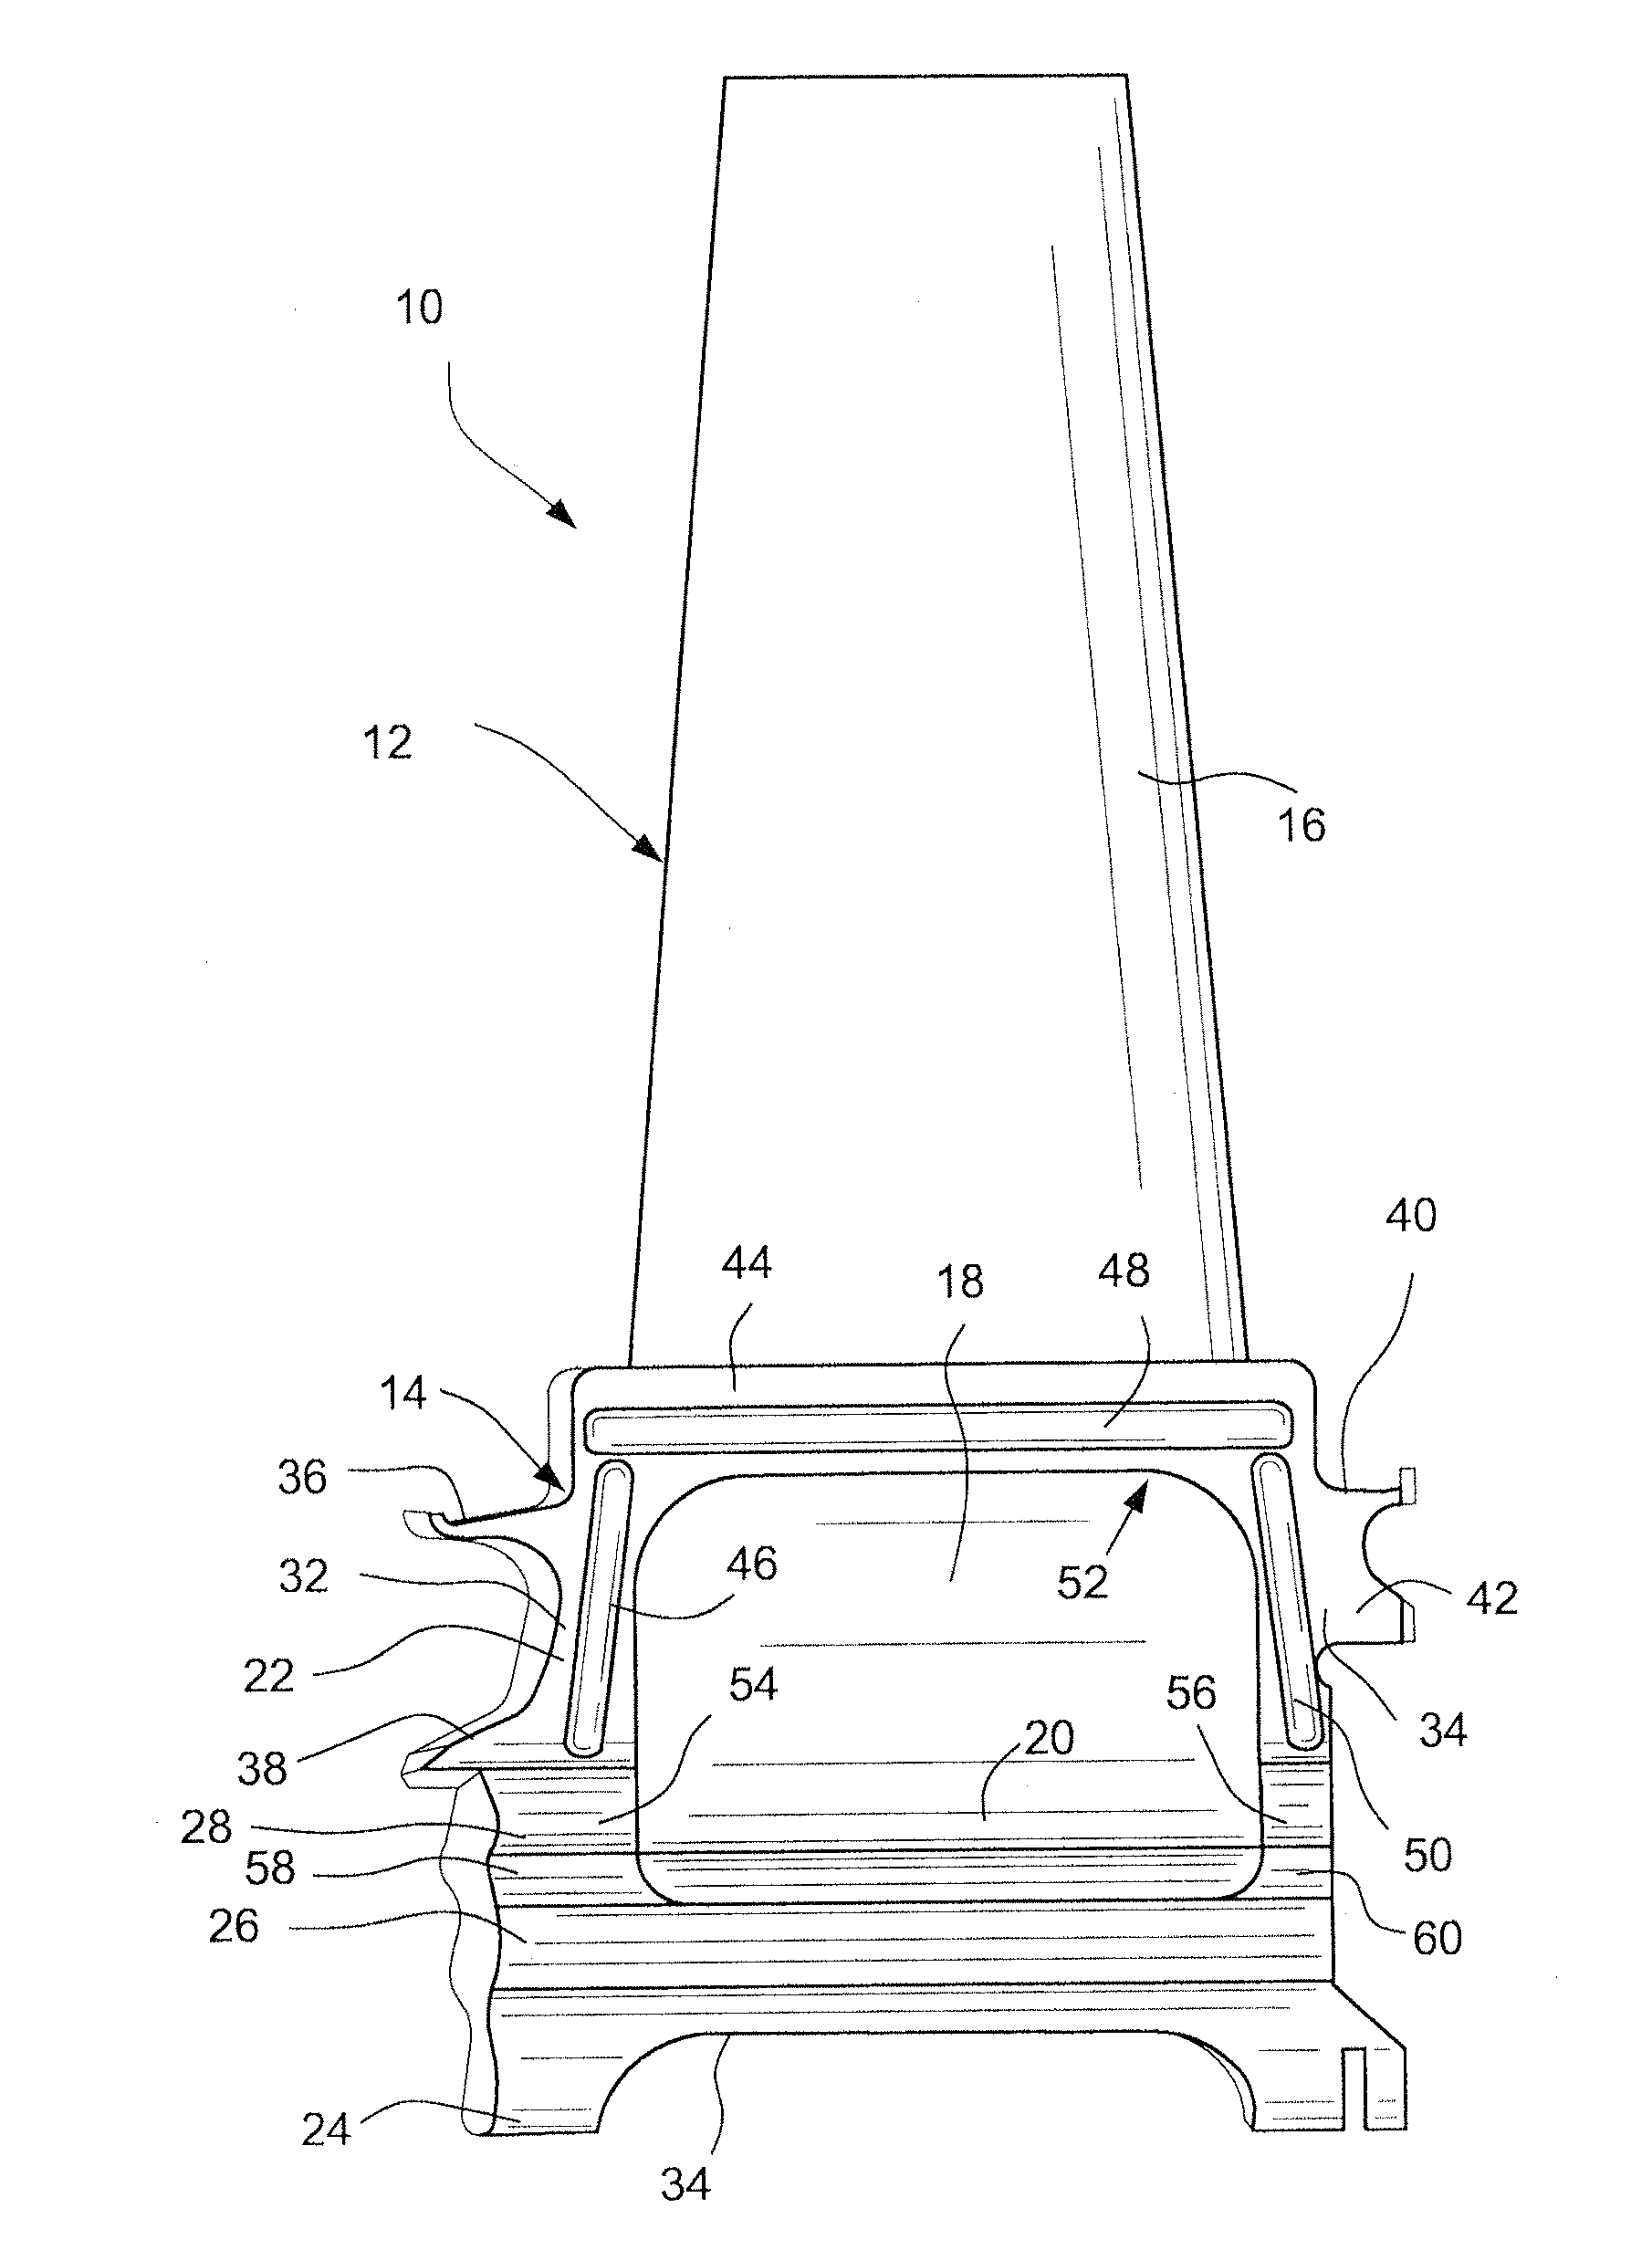 Composite airfoil assembly